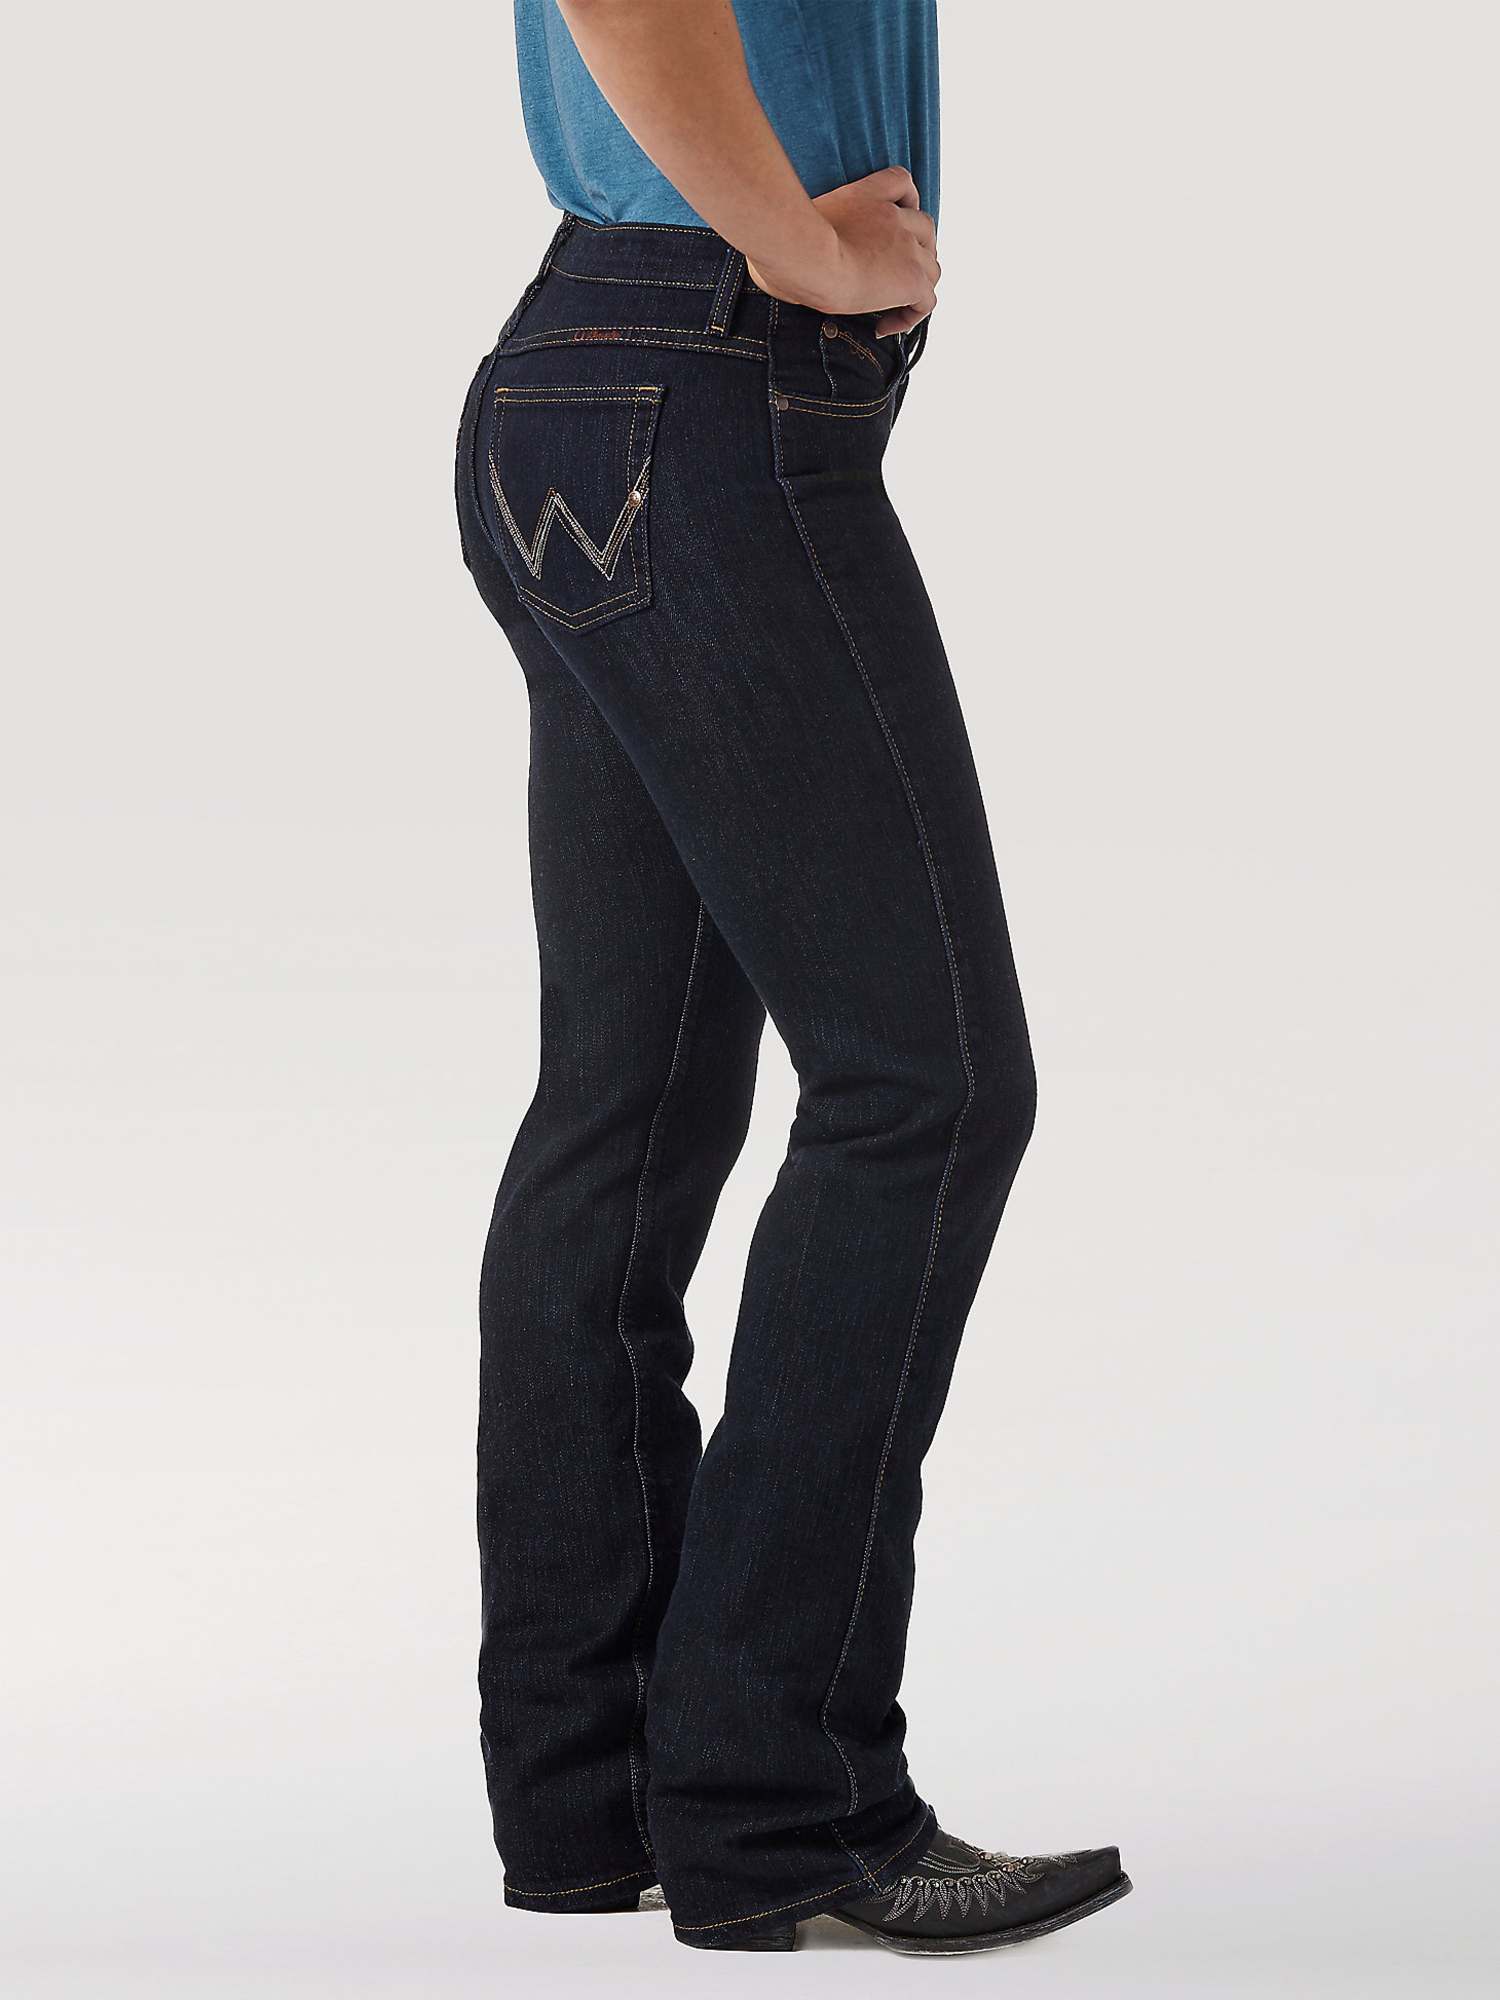 Wrangler Ladies Q-Baby Ultimate Riding Jeans - Frontier Western Shop